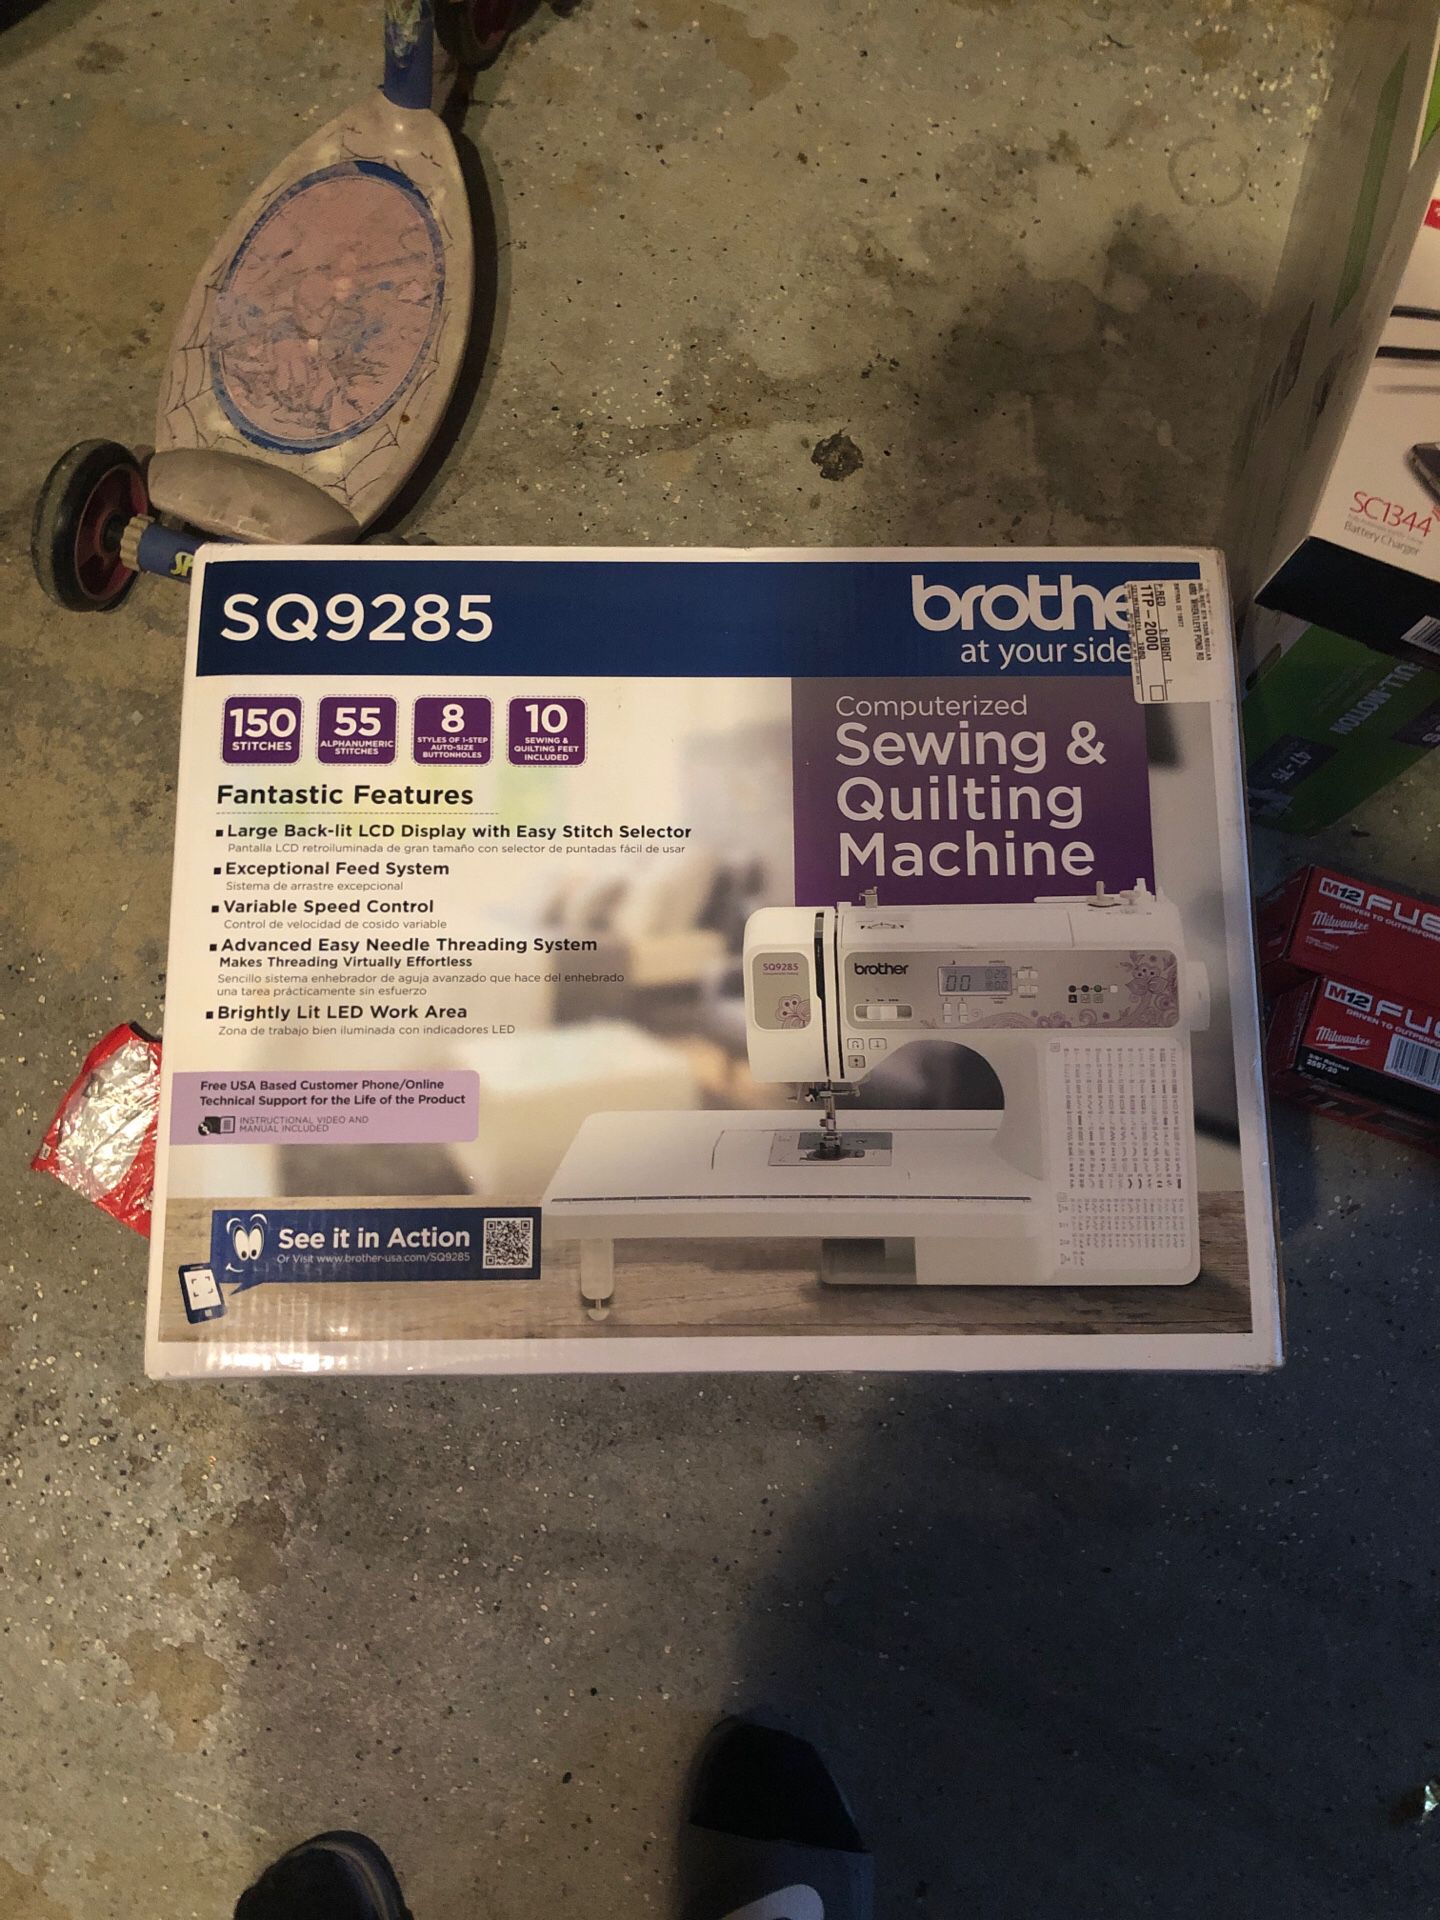 brother sewing & quilting machine - sq9285